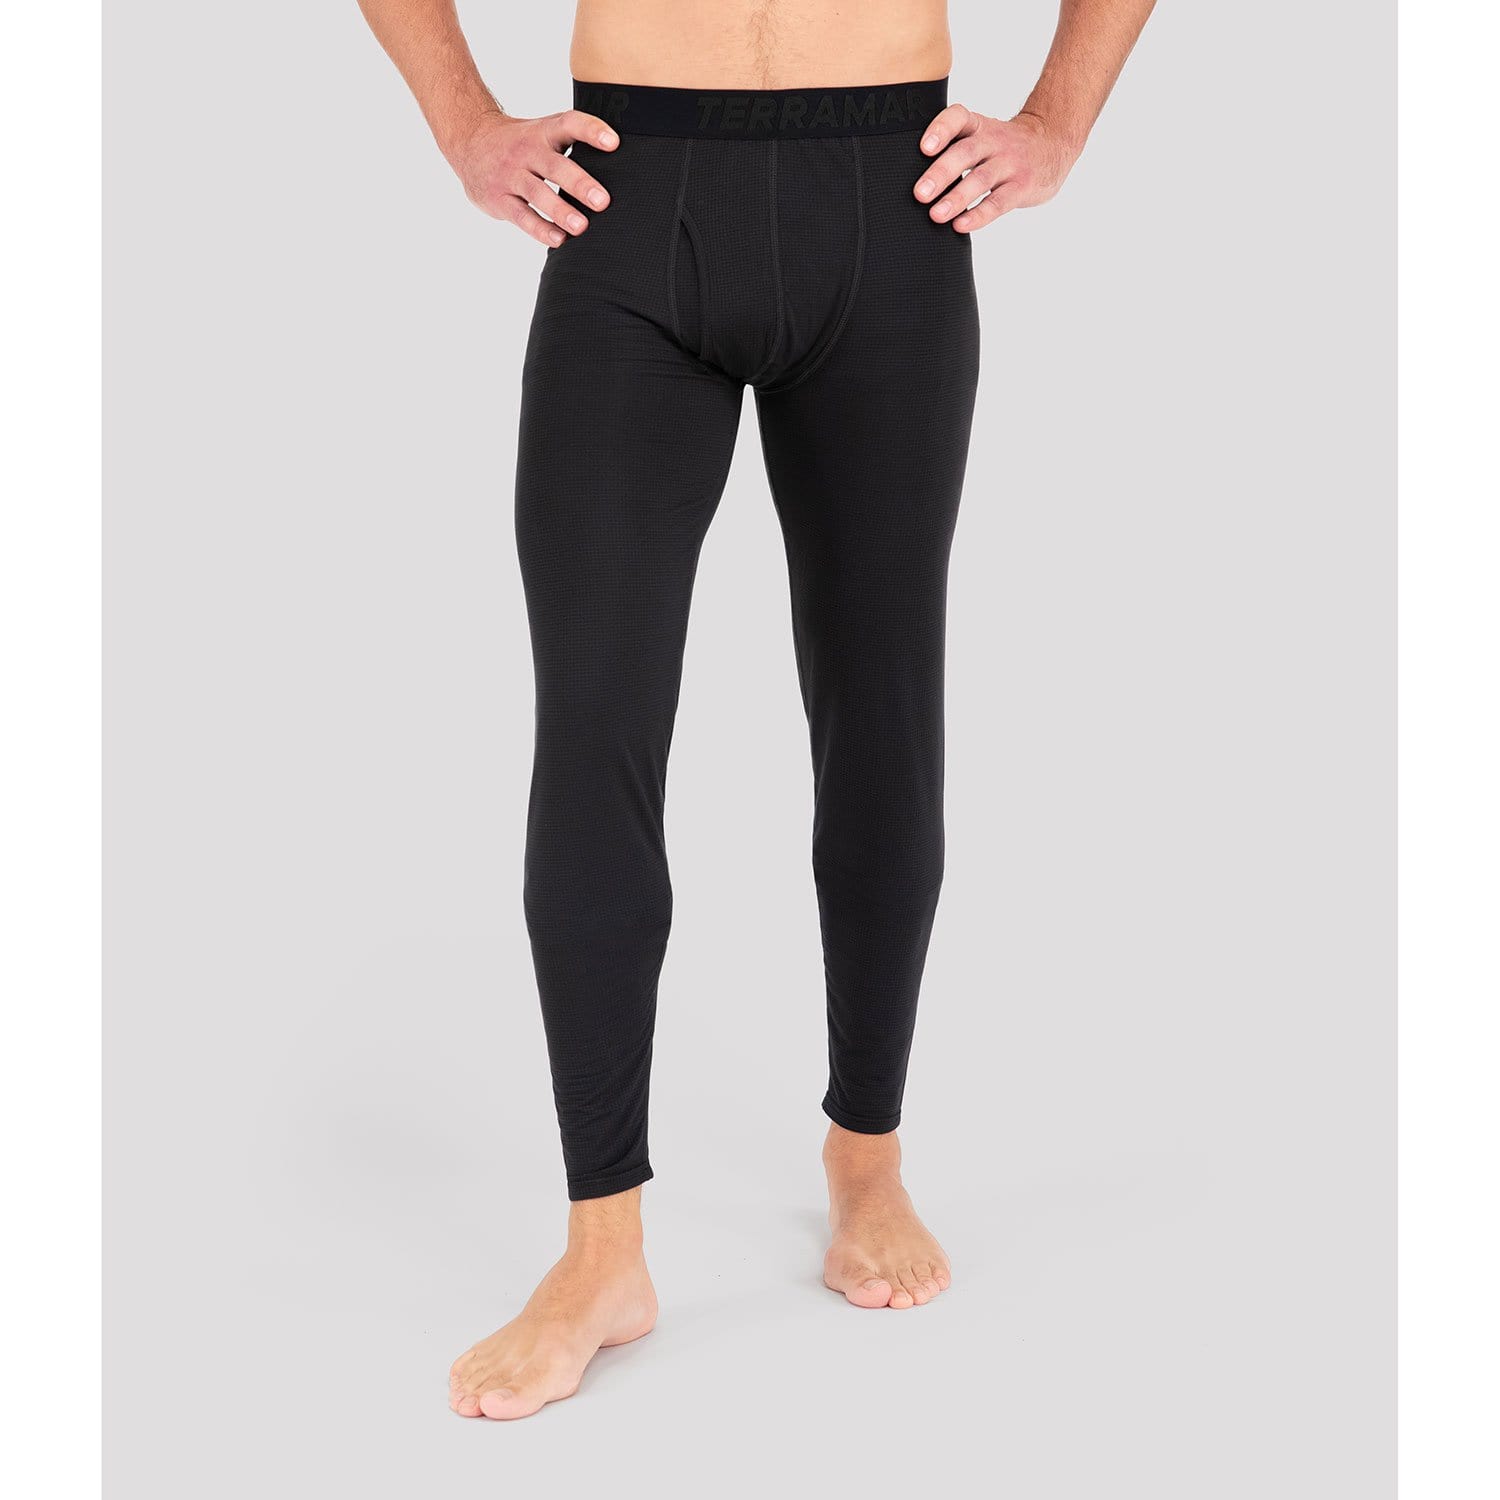 ColdPruf Men’s Performance Base Layer Thermal Underwear Pants - Black